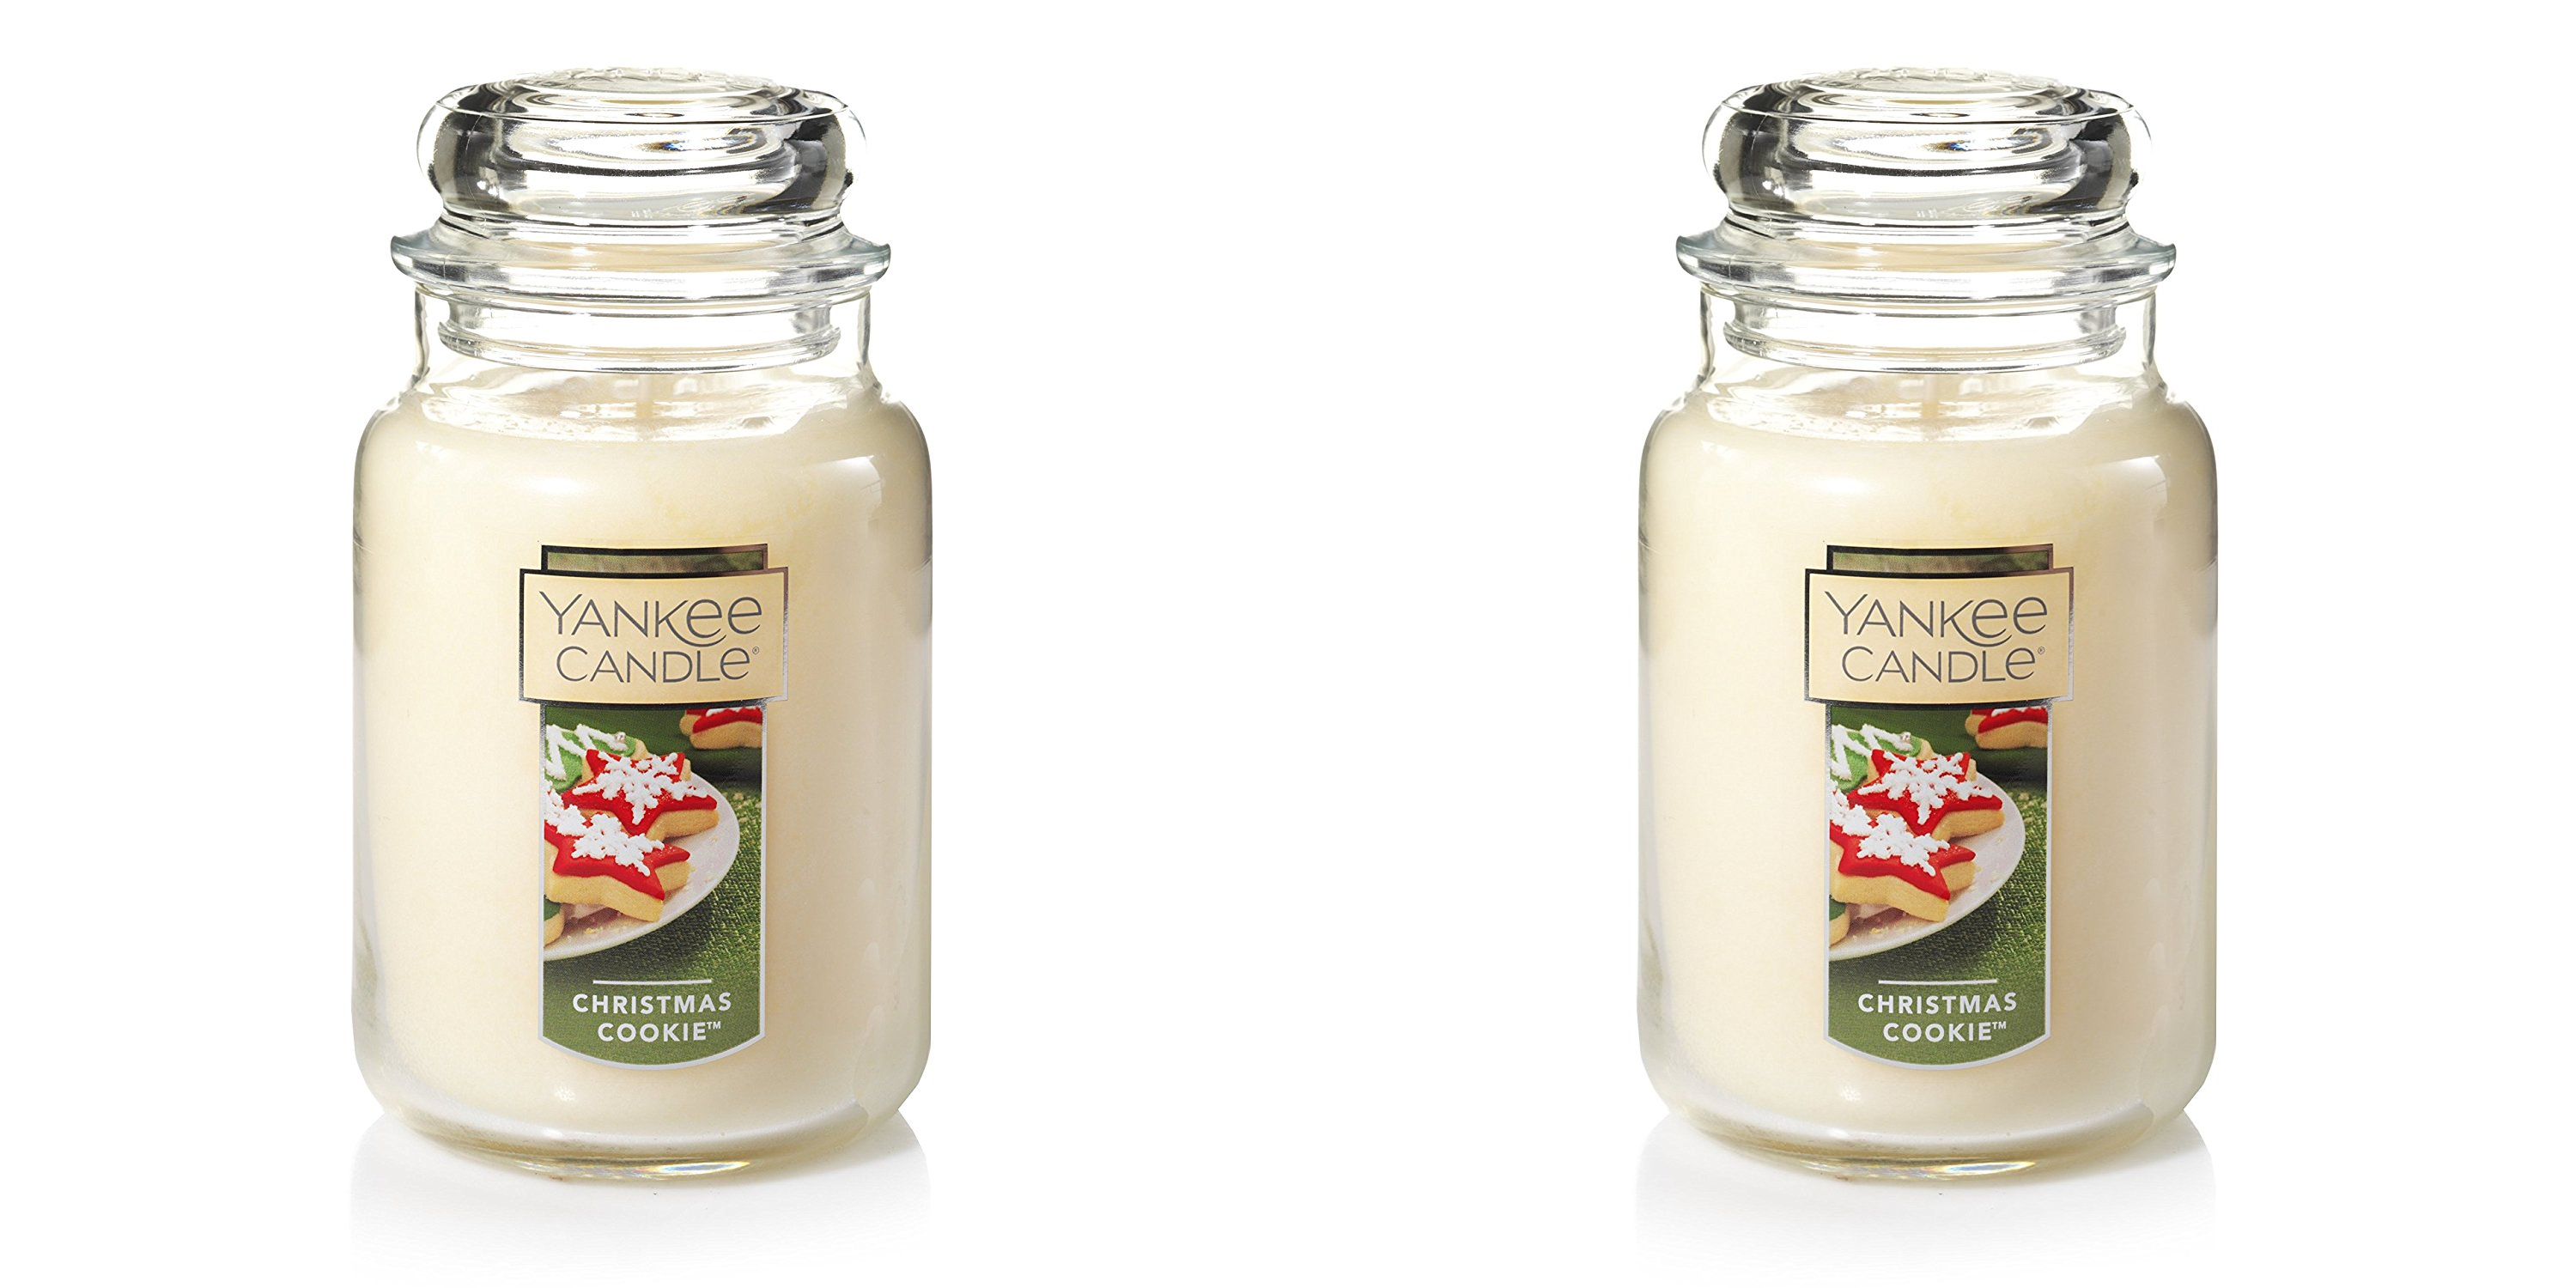 Yankee Candle Christmas Cookie Large Jar Candle Only $10.99! (Reg $27.99)